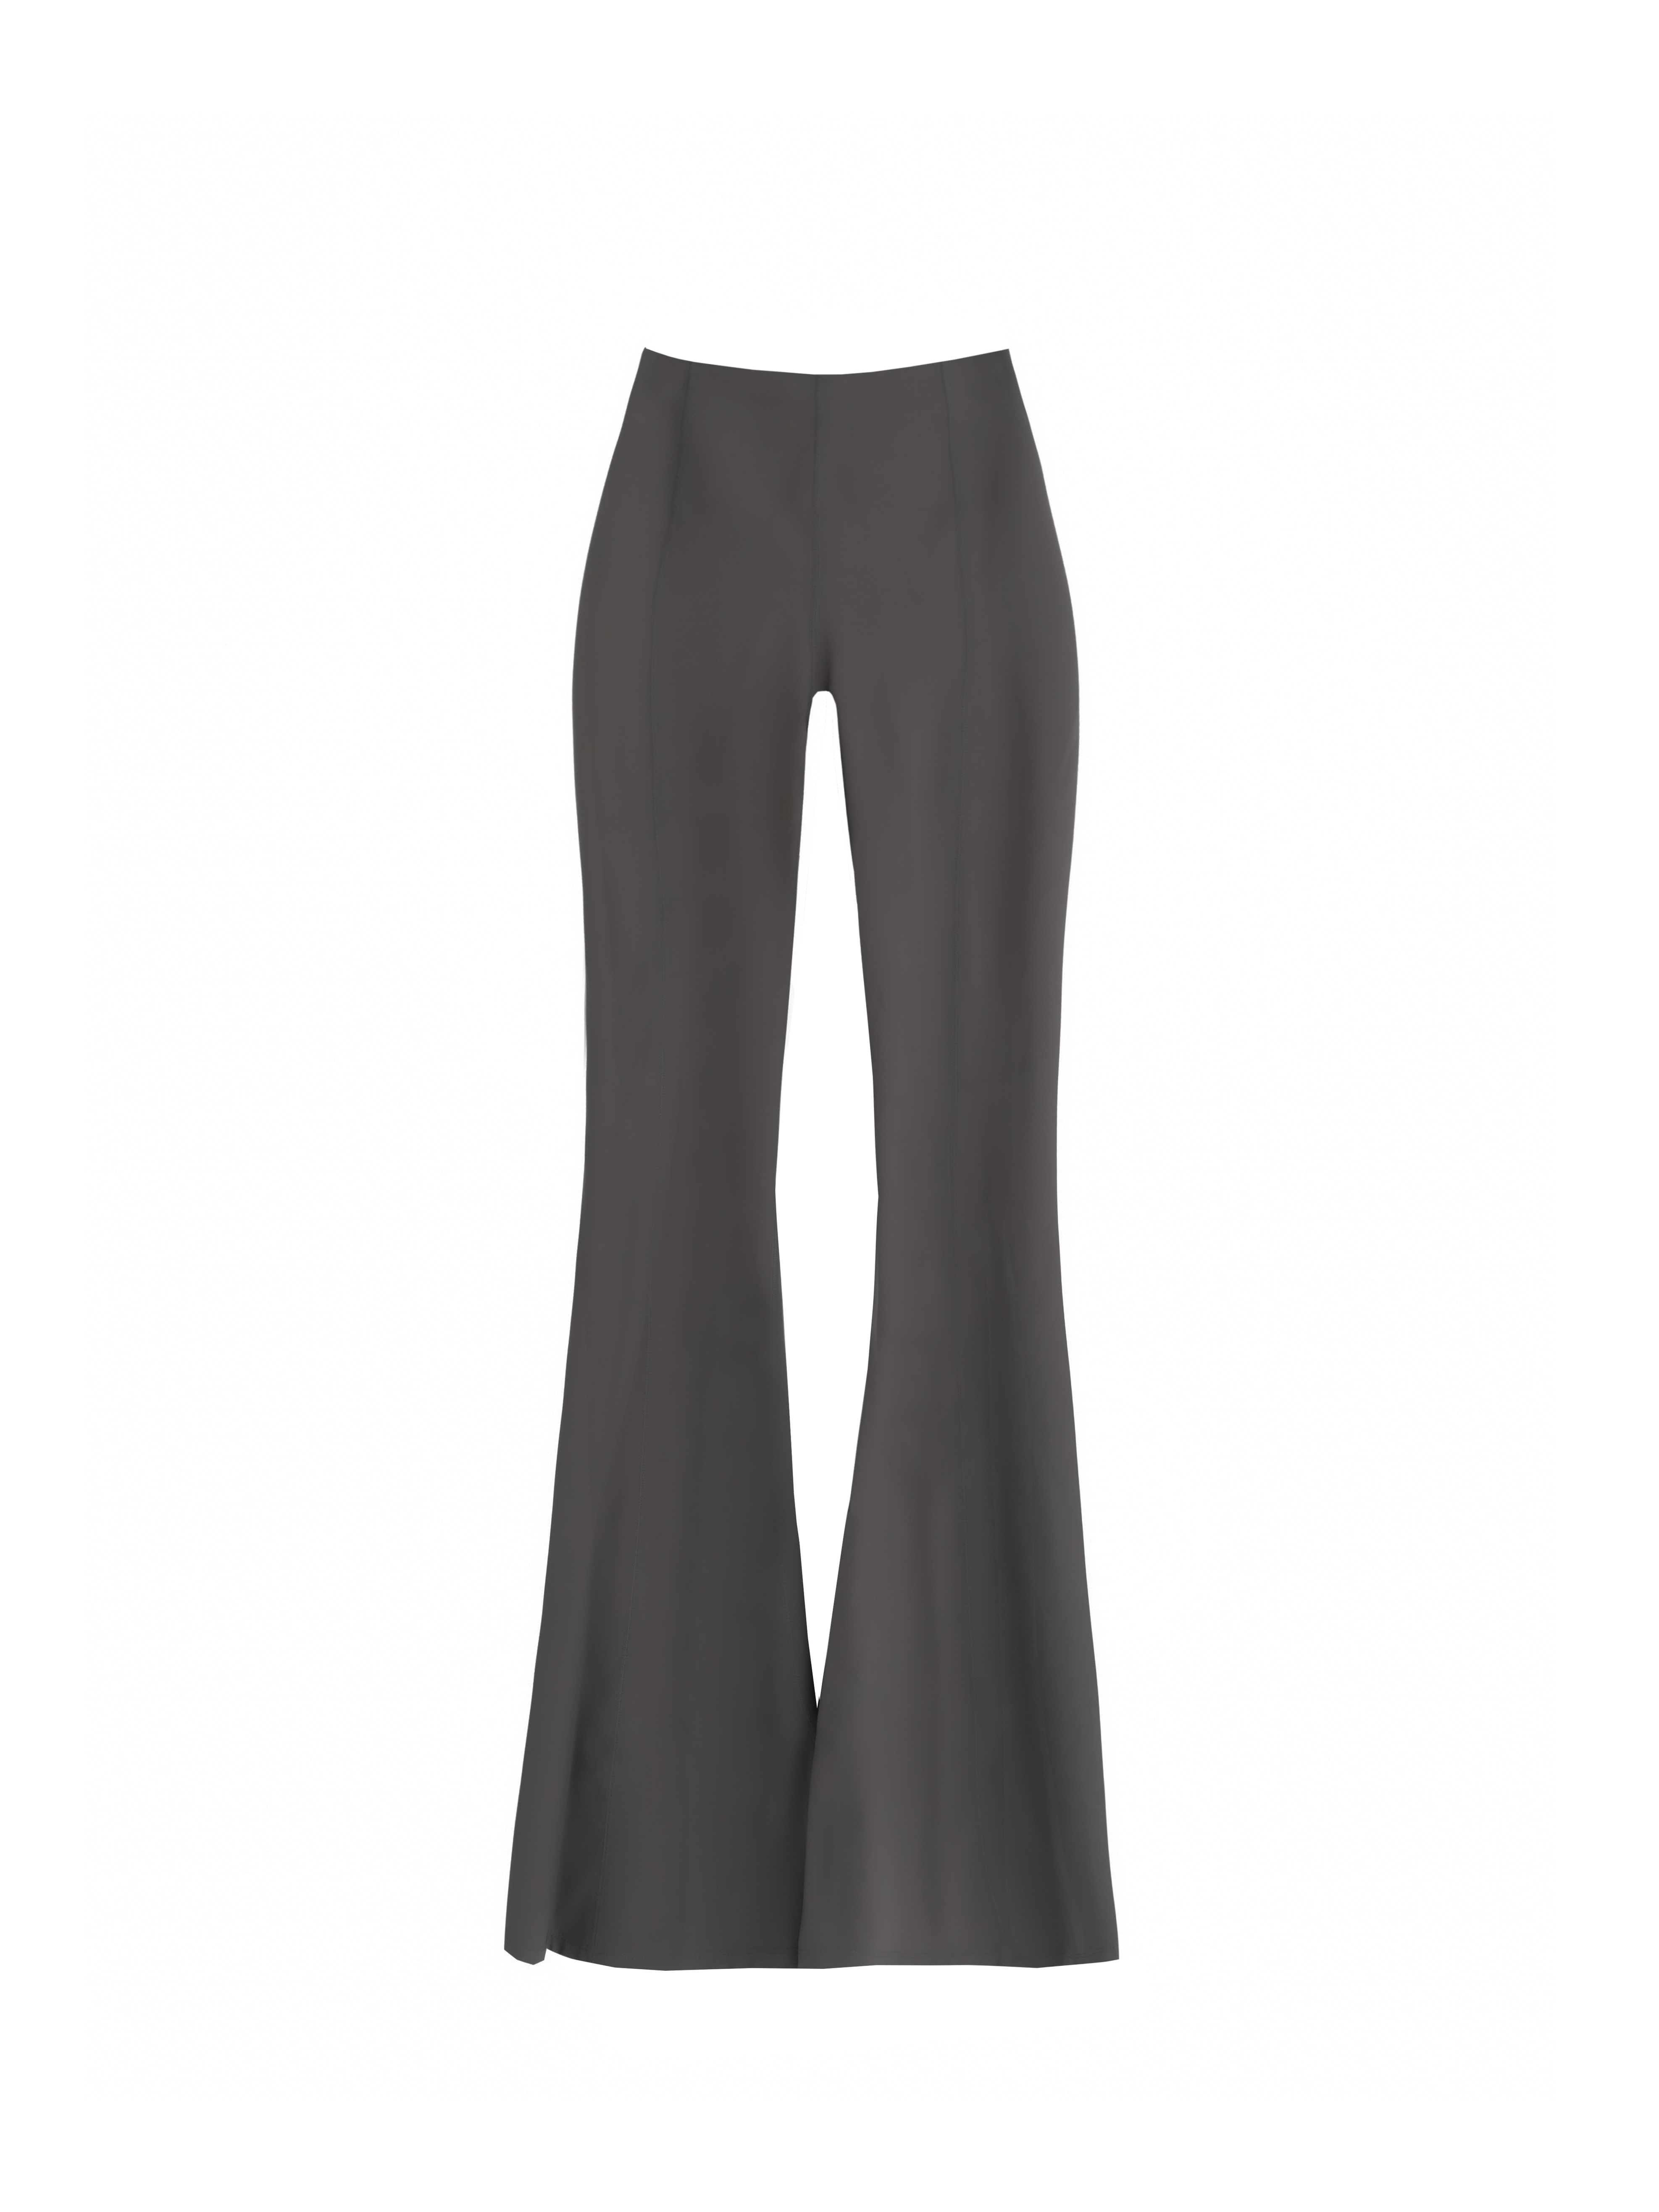 [ODOR MADE] flare pants